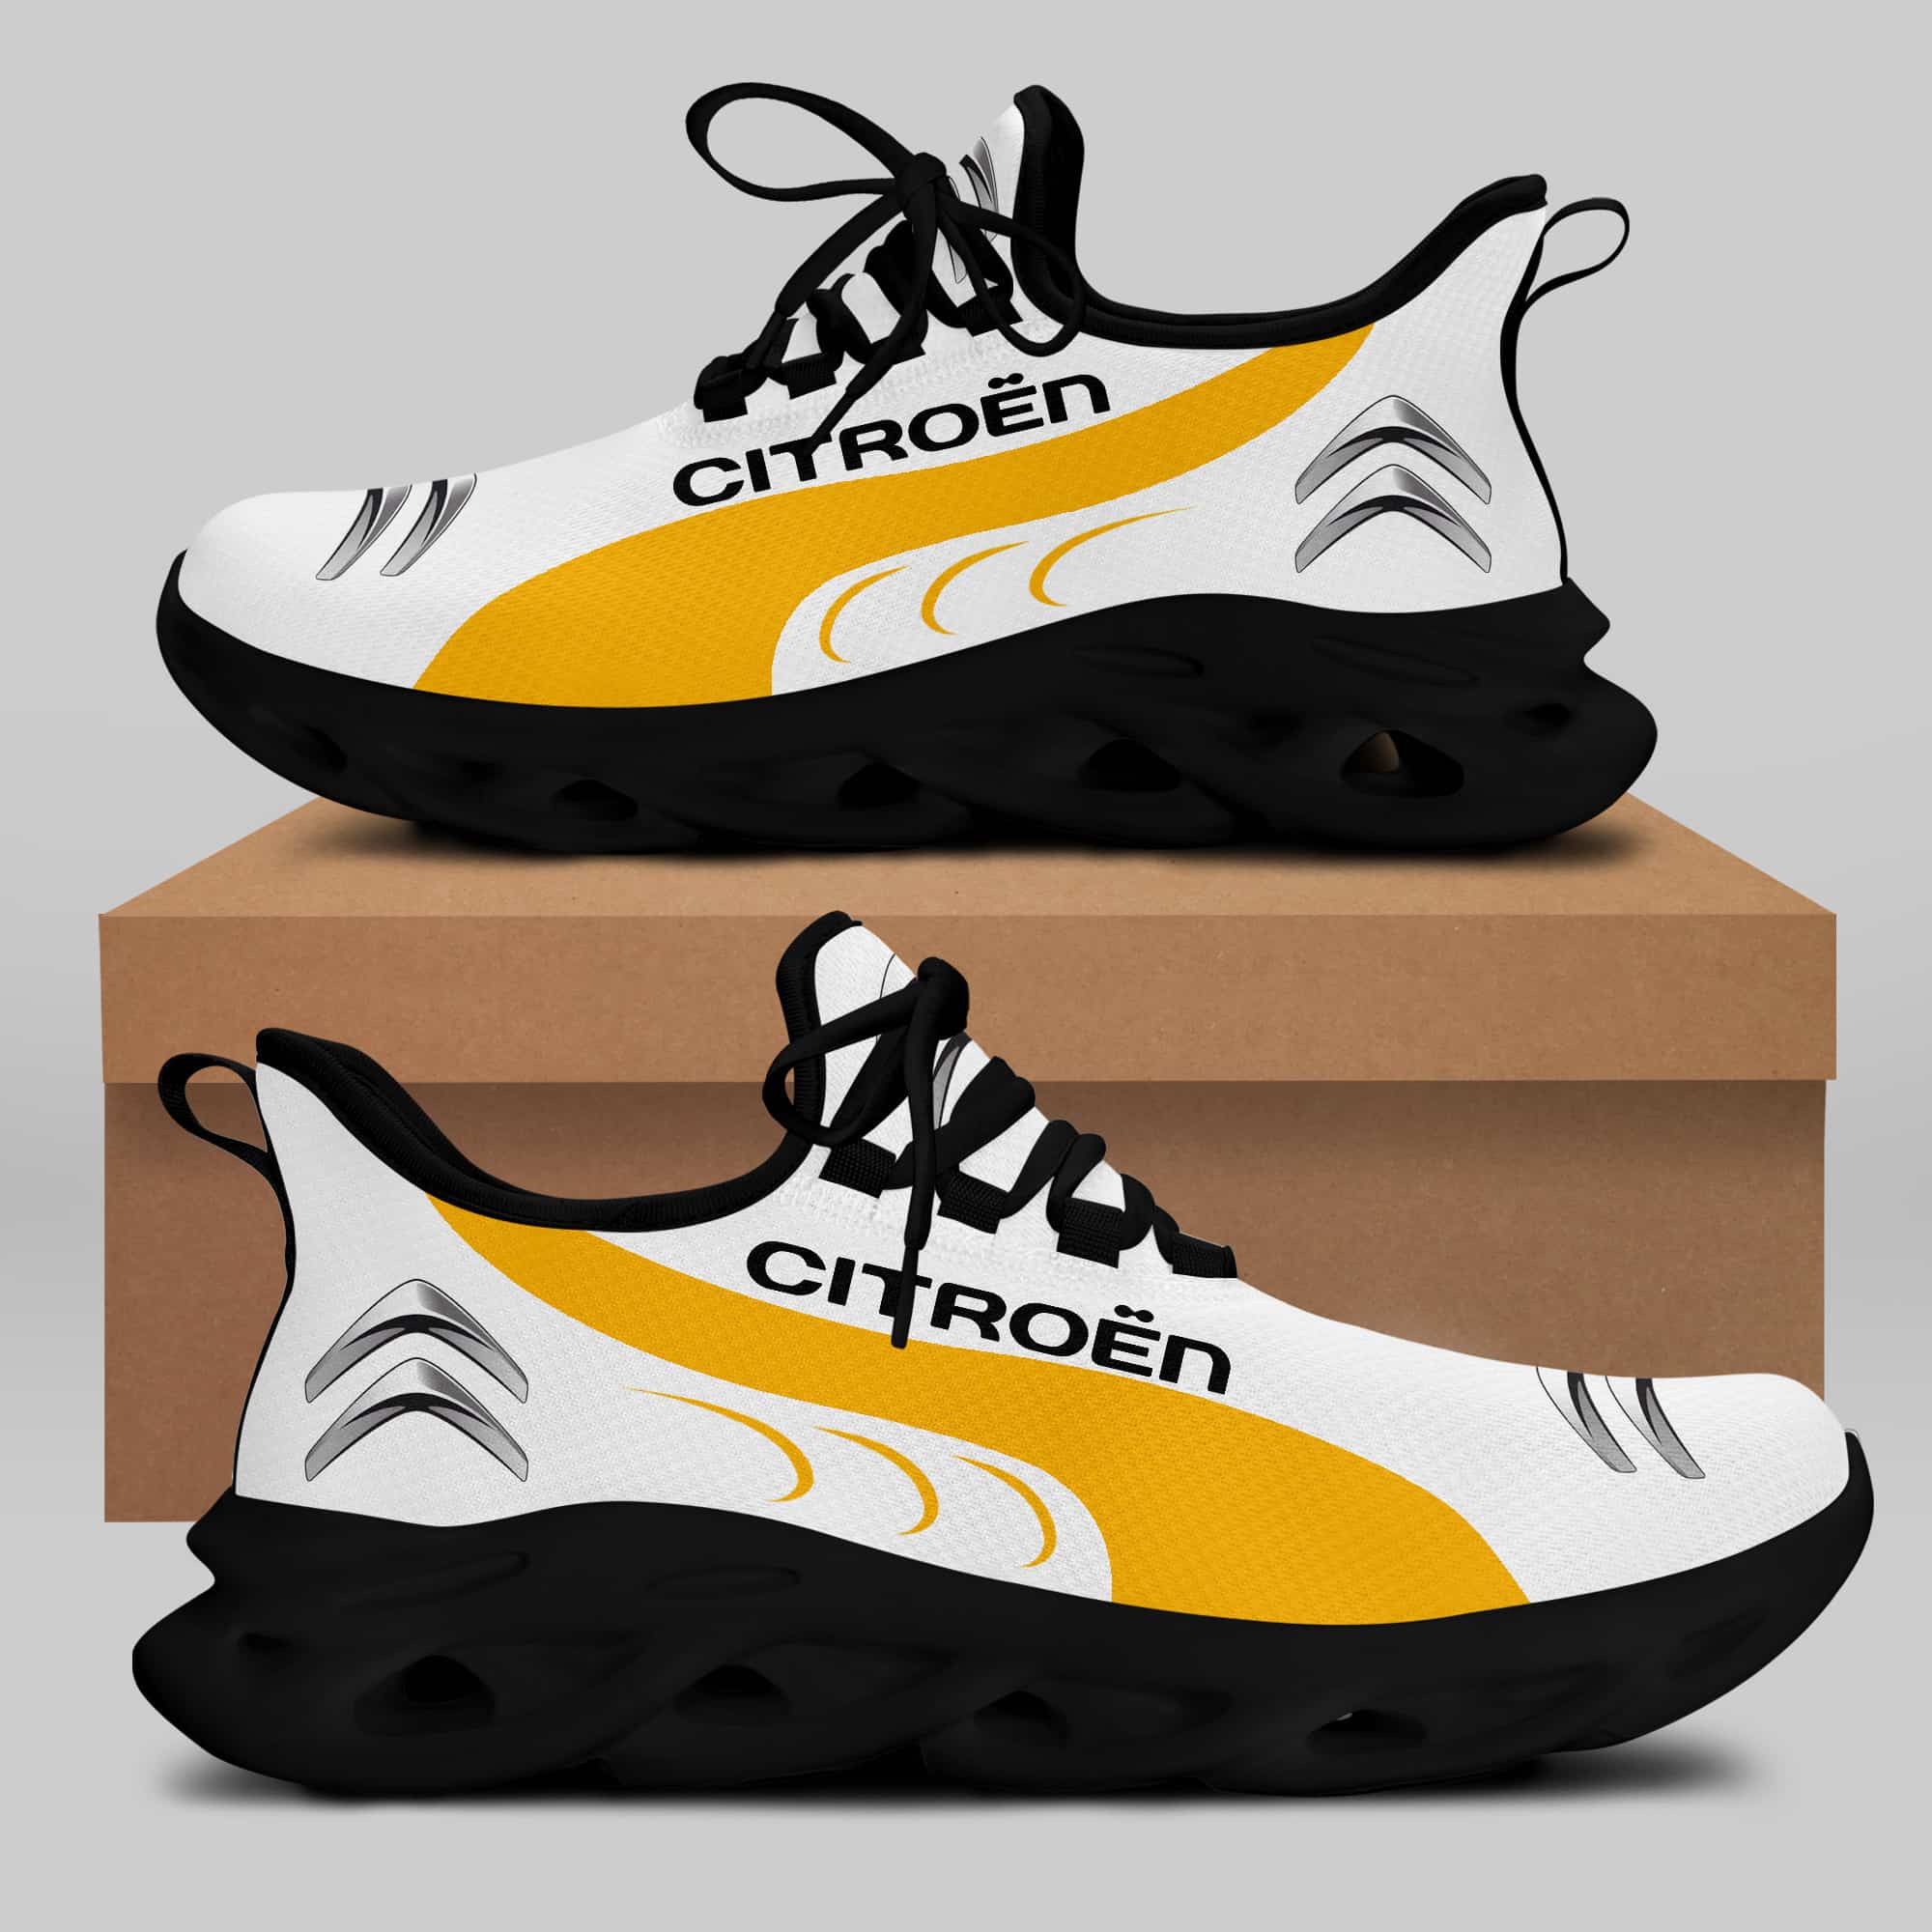 Citroën Running Shoes Max Soul Shoes Sneakers Ver 20 2